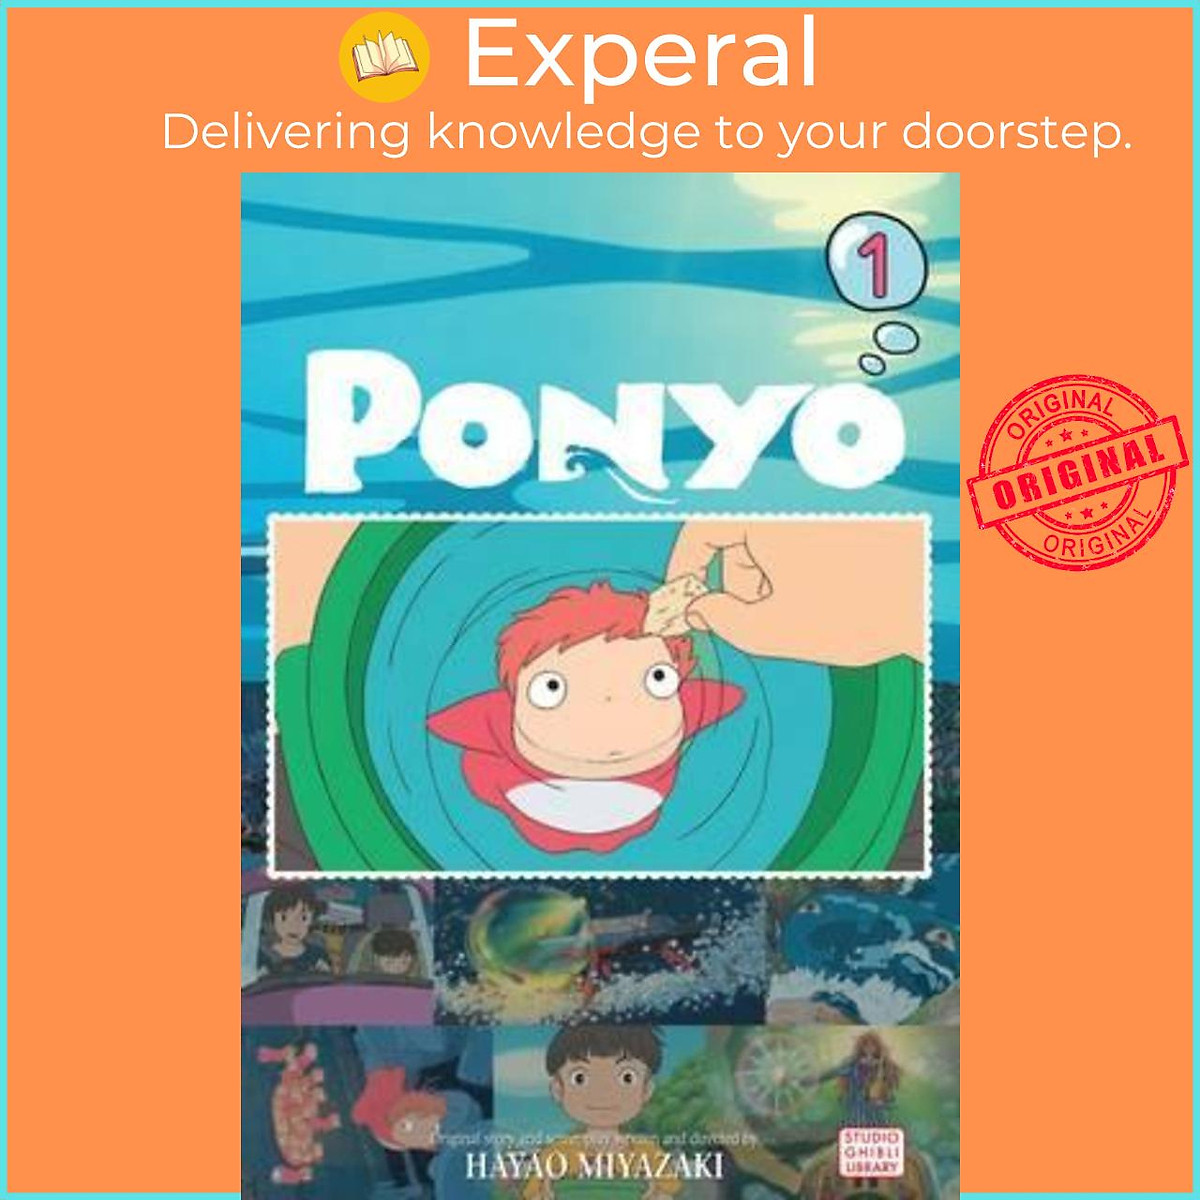 Ponyo Film Comic, Vol. 1, Book by Hayao Miyazaki, Official Publisher Page